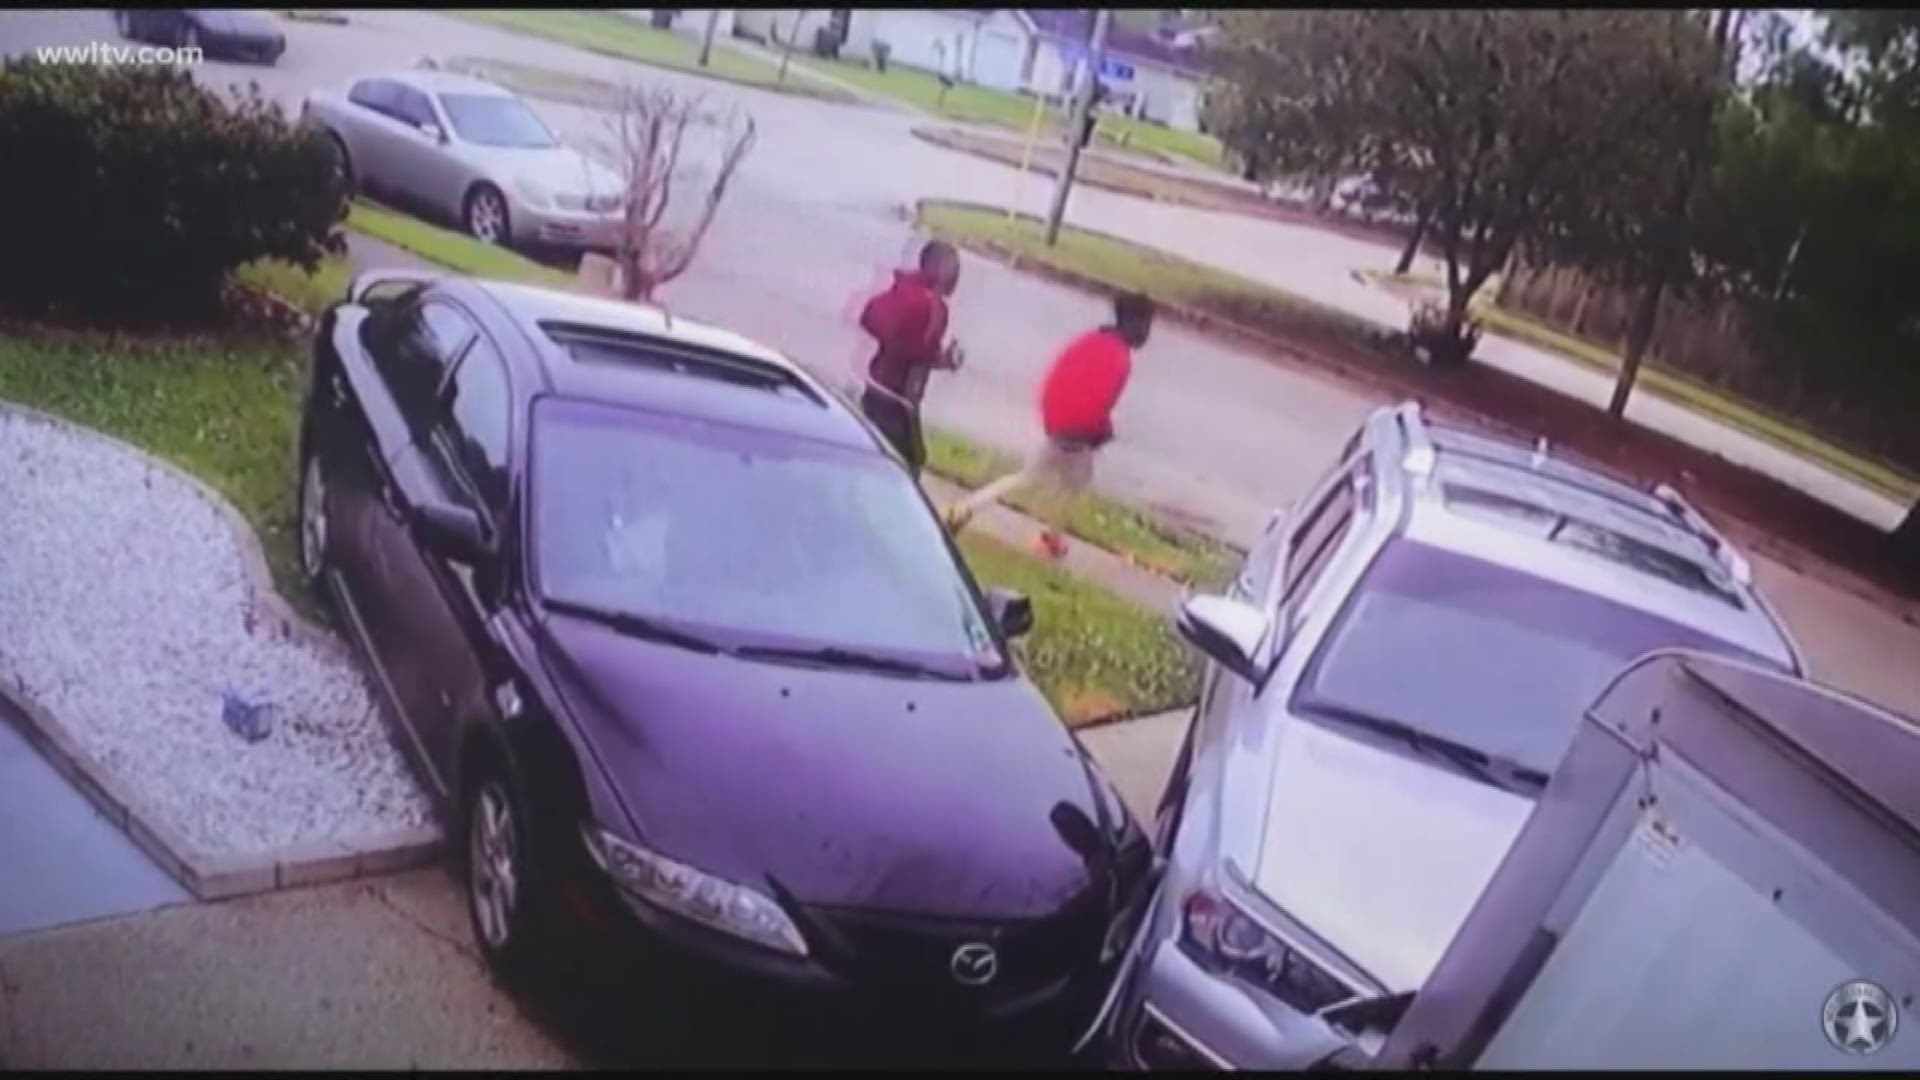 New Orleans Police believe those in the car may possibly be in their early teens.